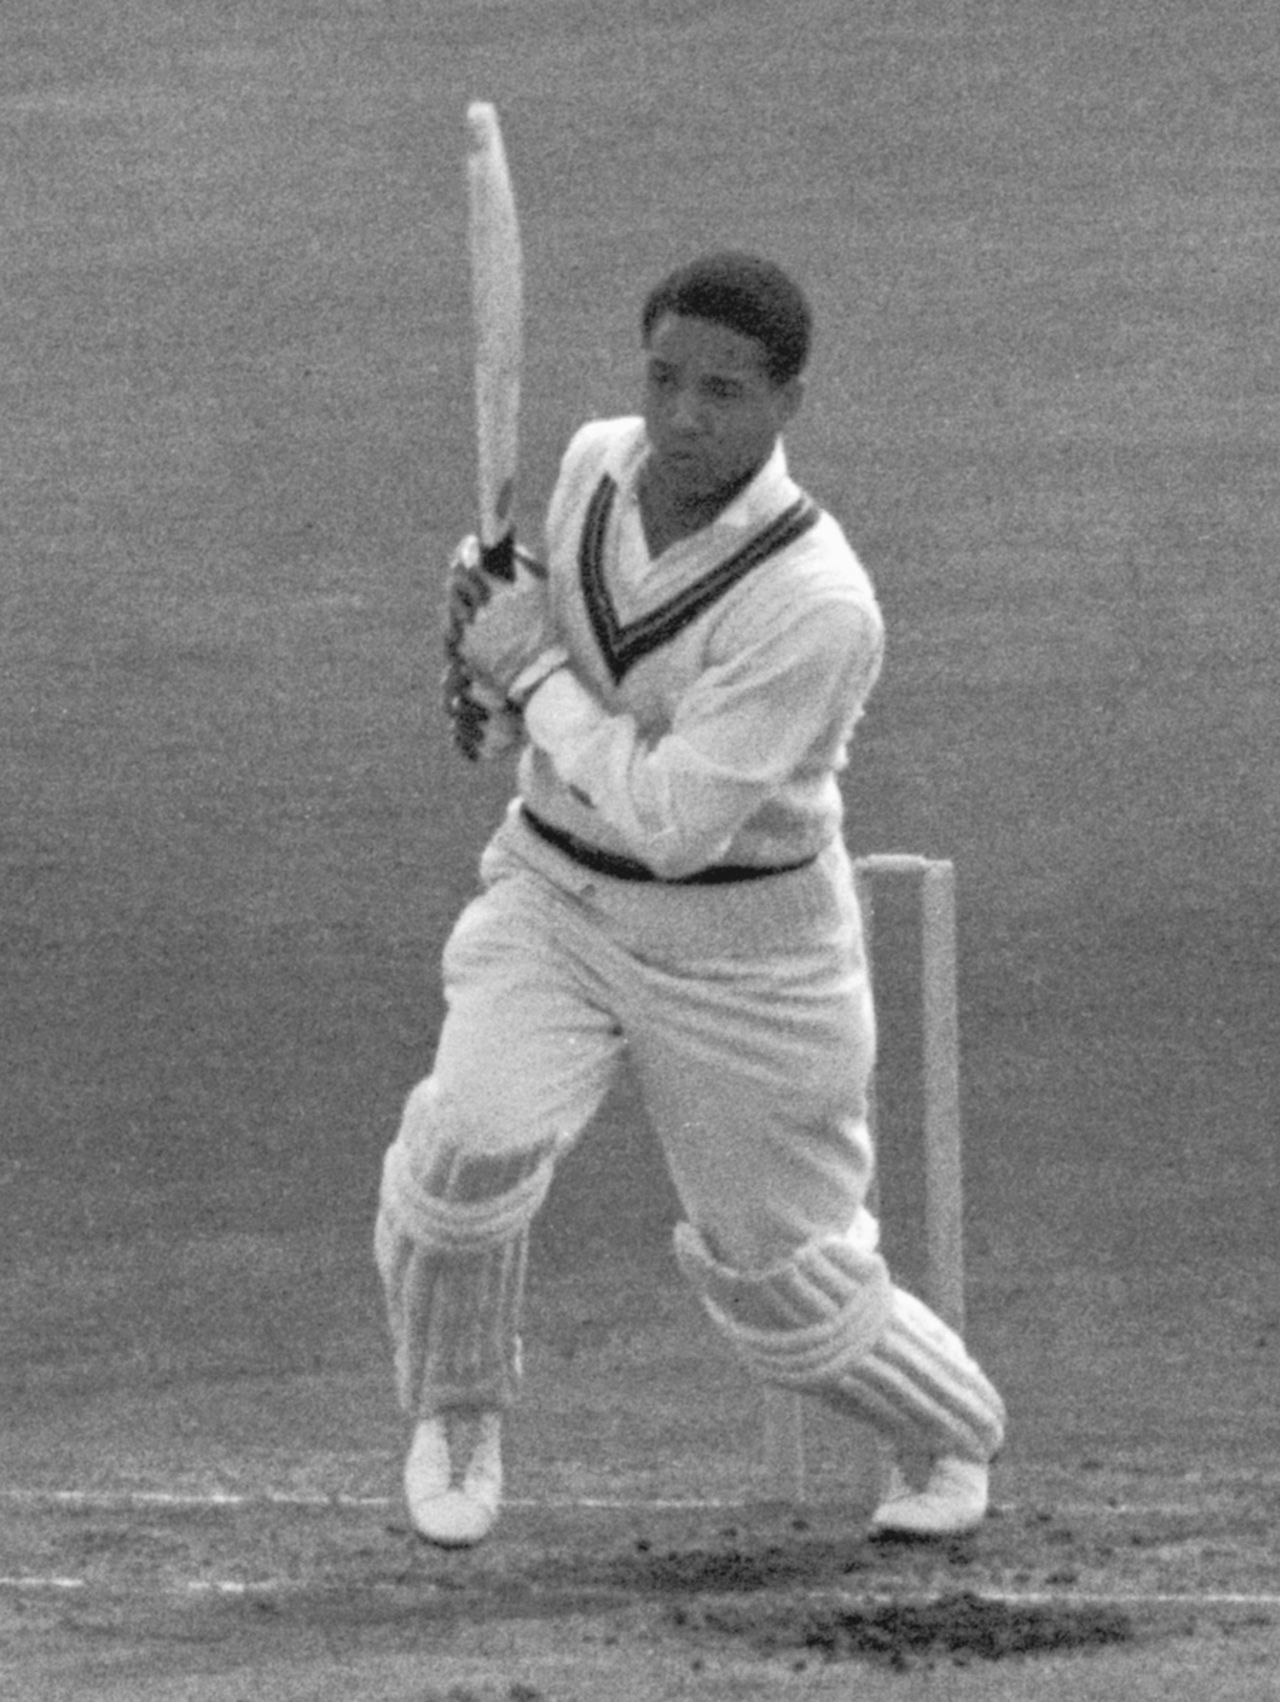 Garry Sobers top-scored for West Indies in both innings, England v West Indies, 5th Test, The Oval, August 24, 1957